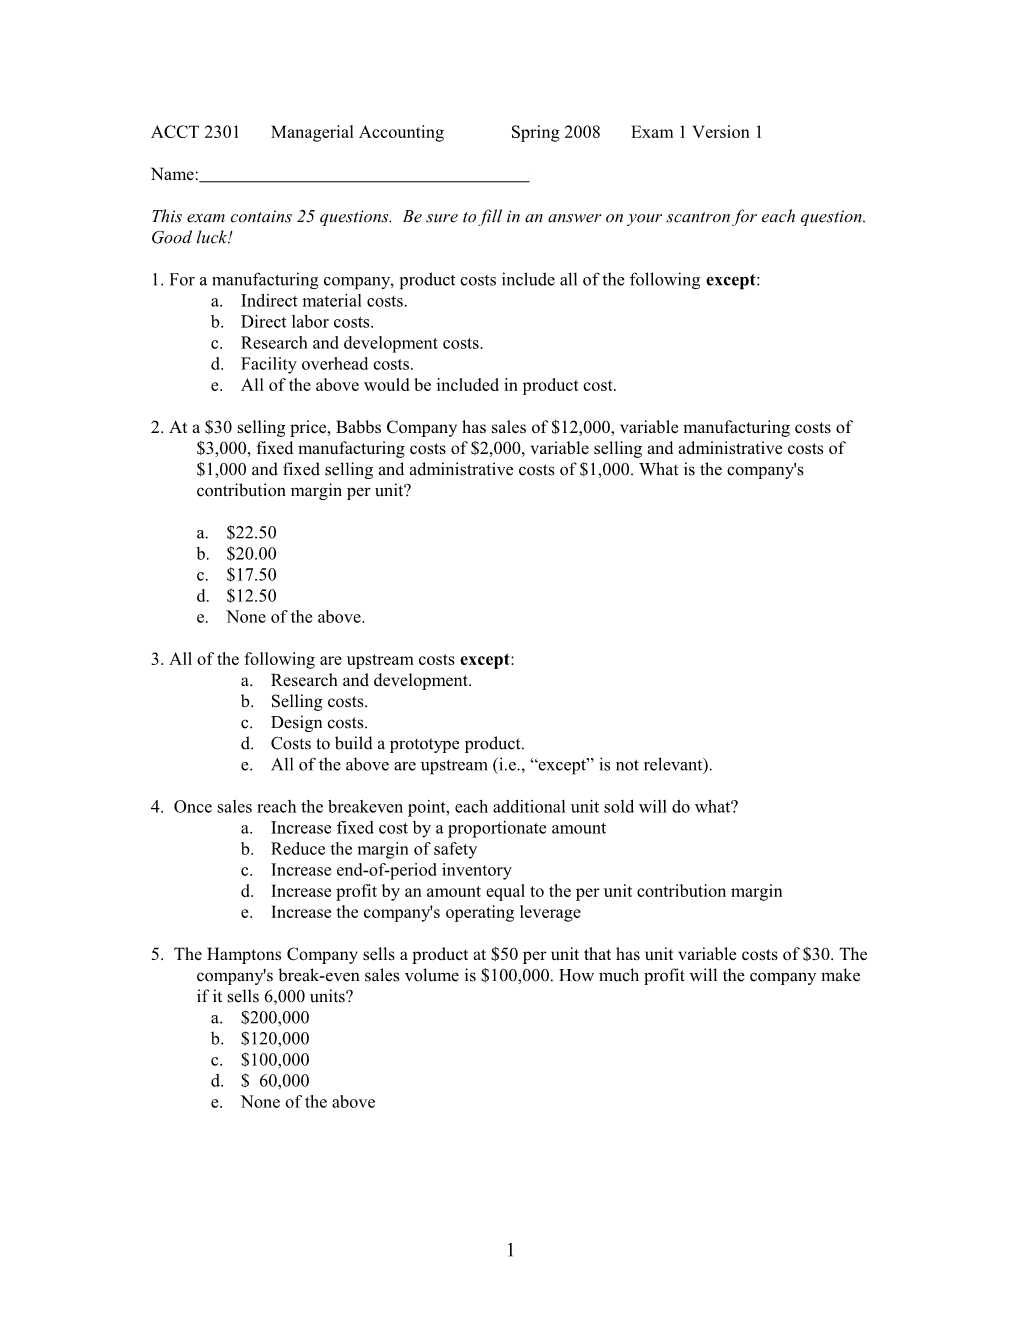 ACCT 2301 Managerial Accountingspring 2008Exam 1 Version 1